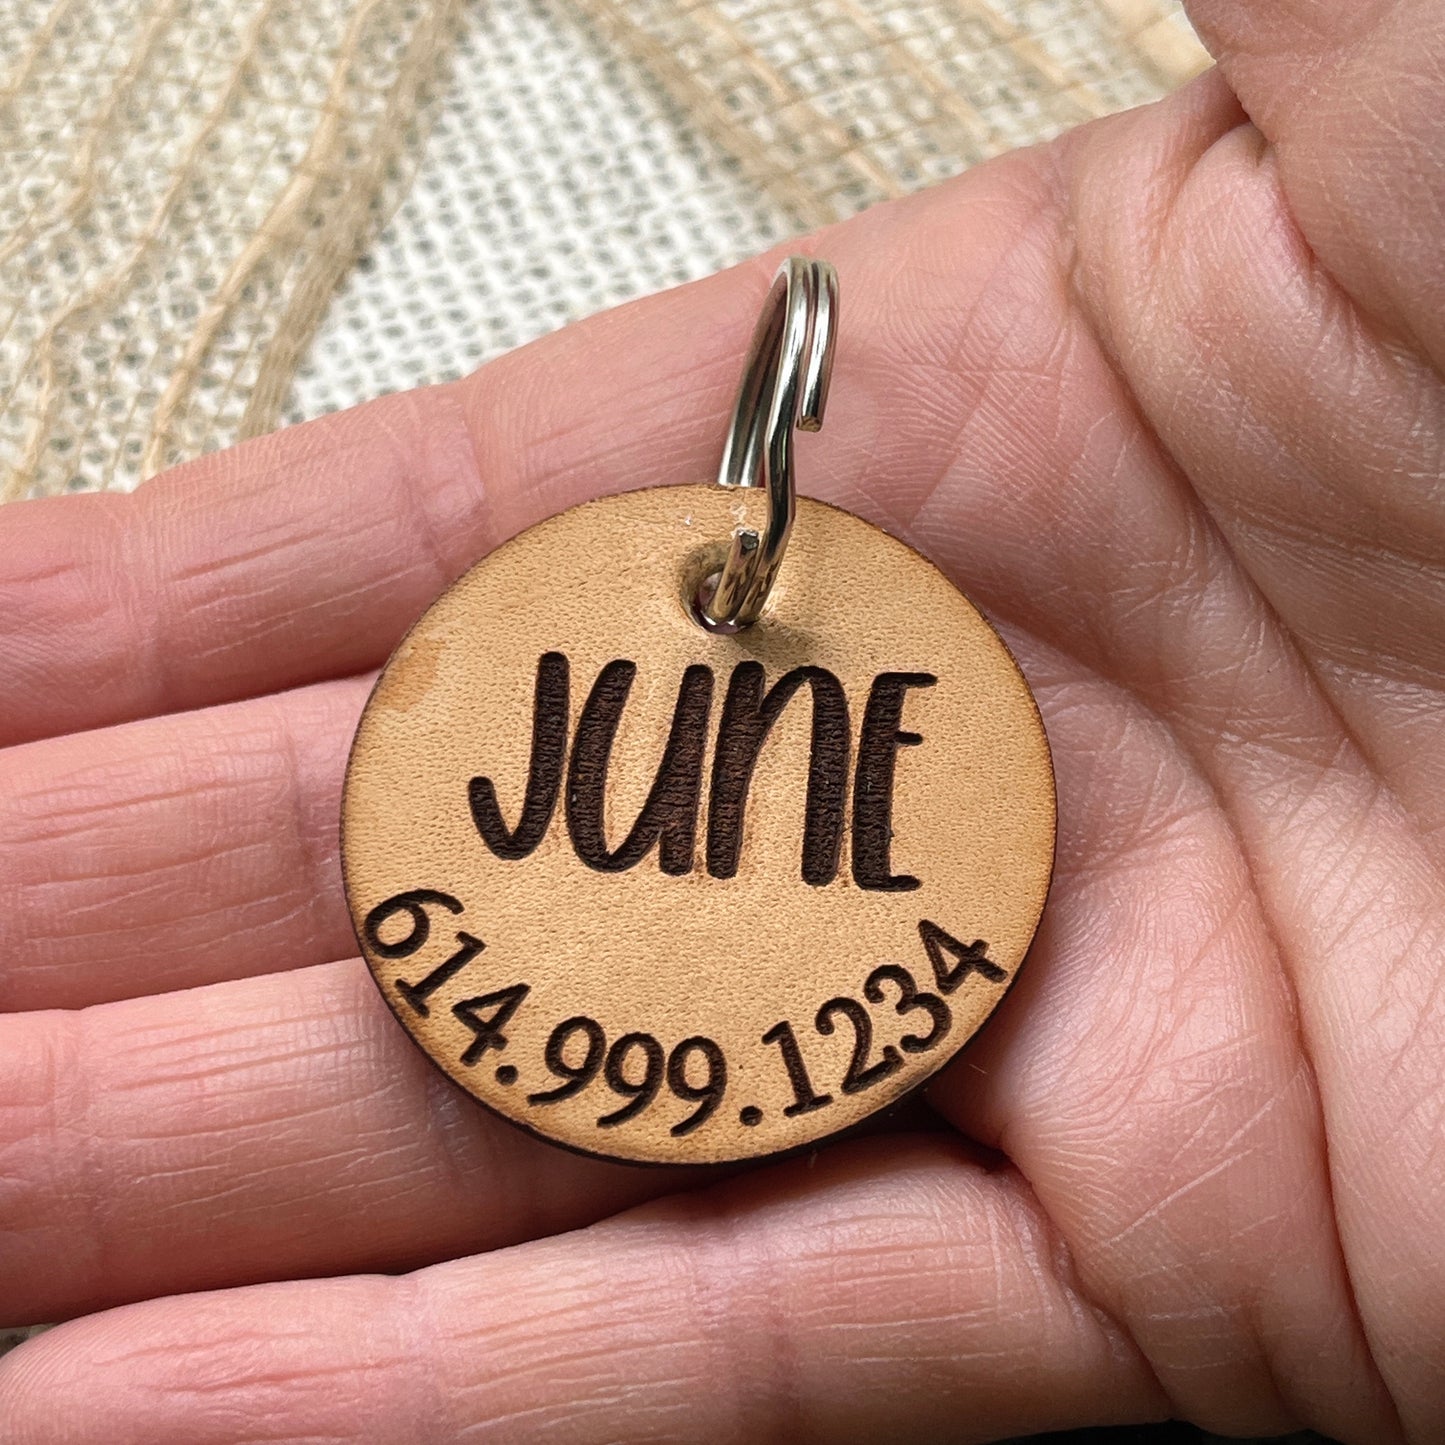 Quiet Dog Tag, Laser Engraved Genuine Leather Pet ID Tag